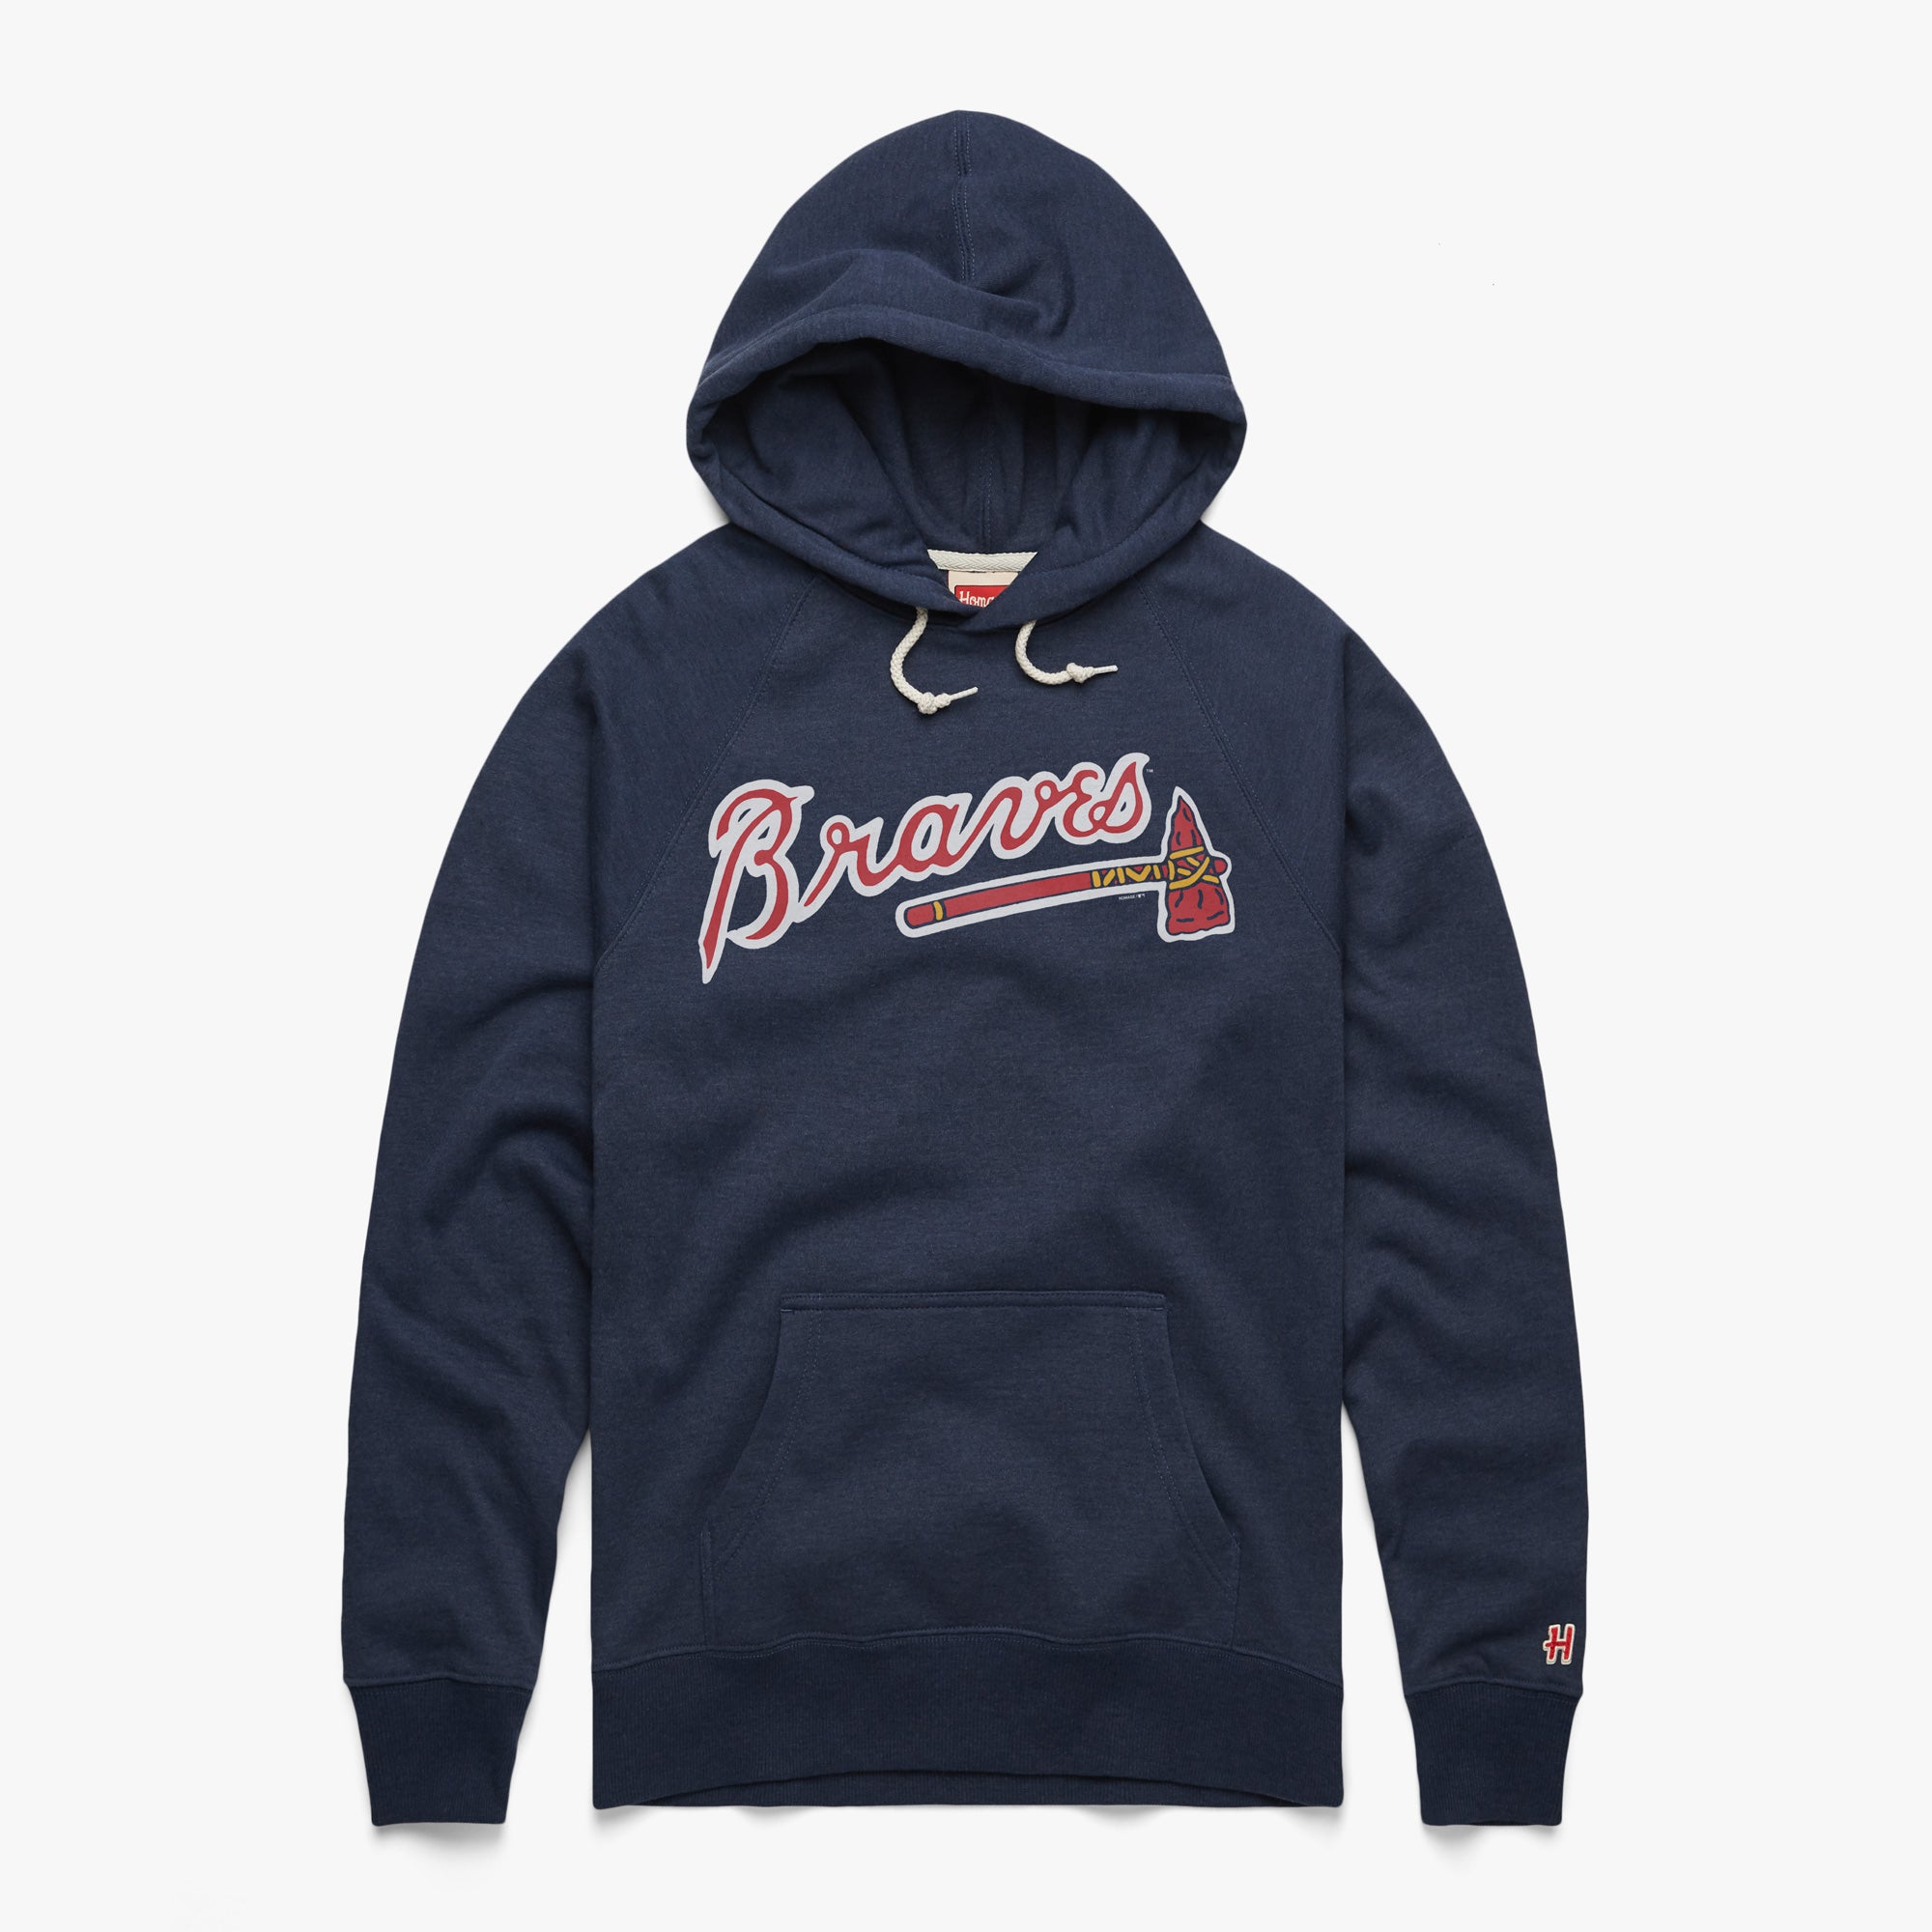 Official Heart This Girl Love Atlanta Braves Shirt, hoodie, sweater and  long sleeve